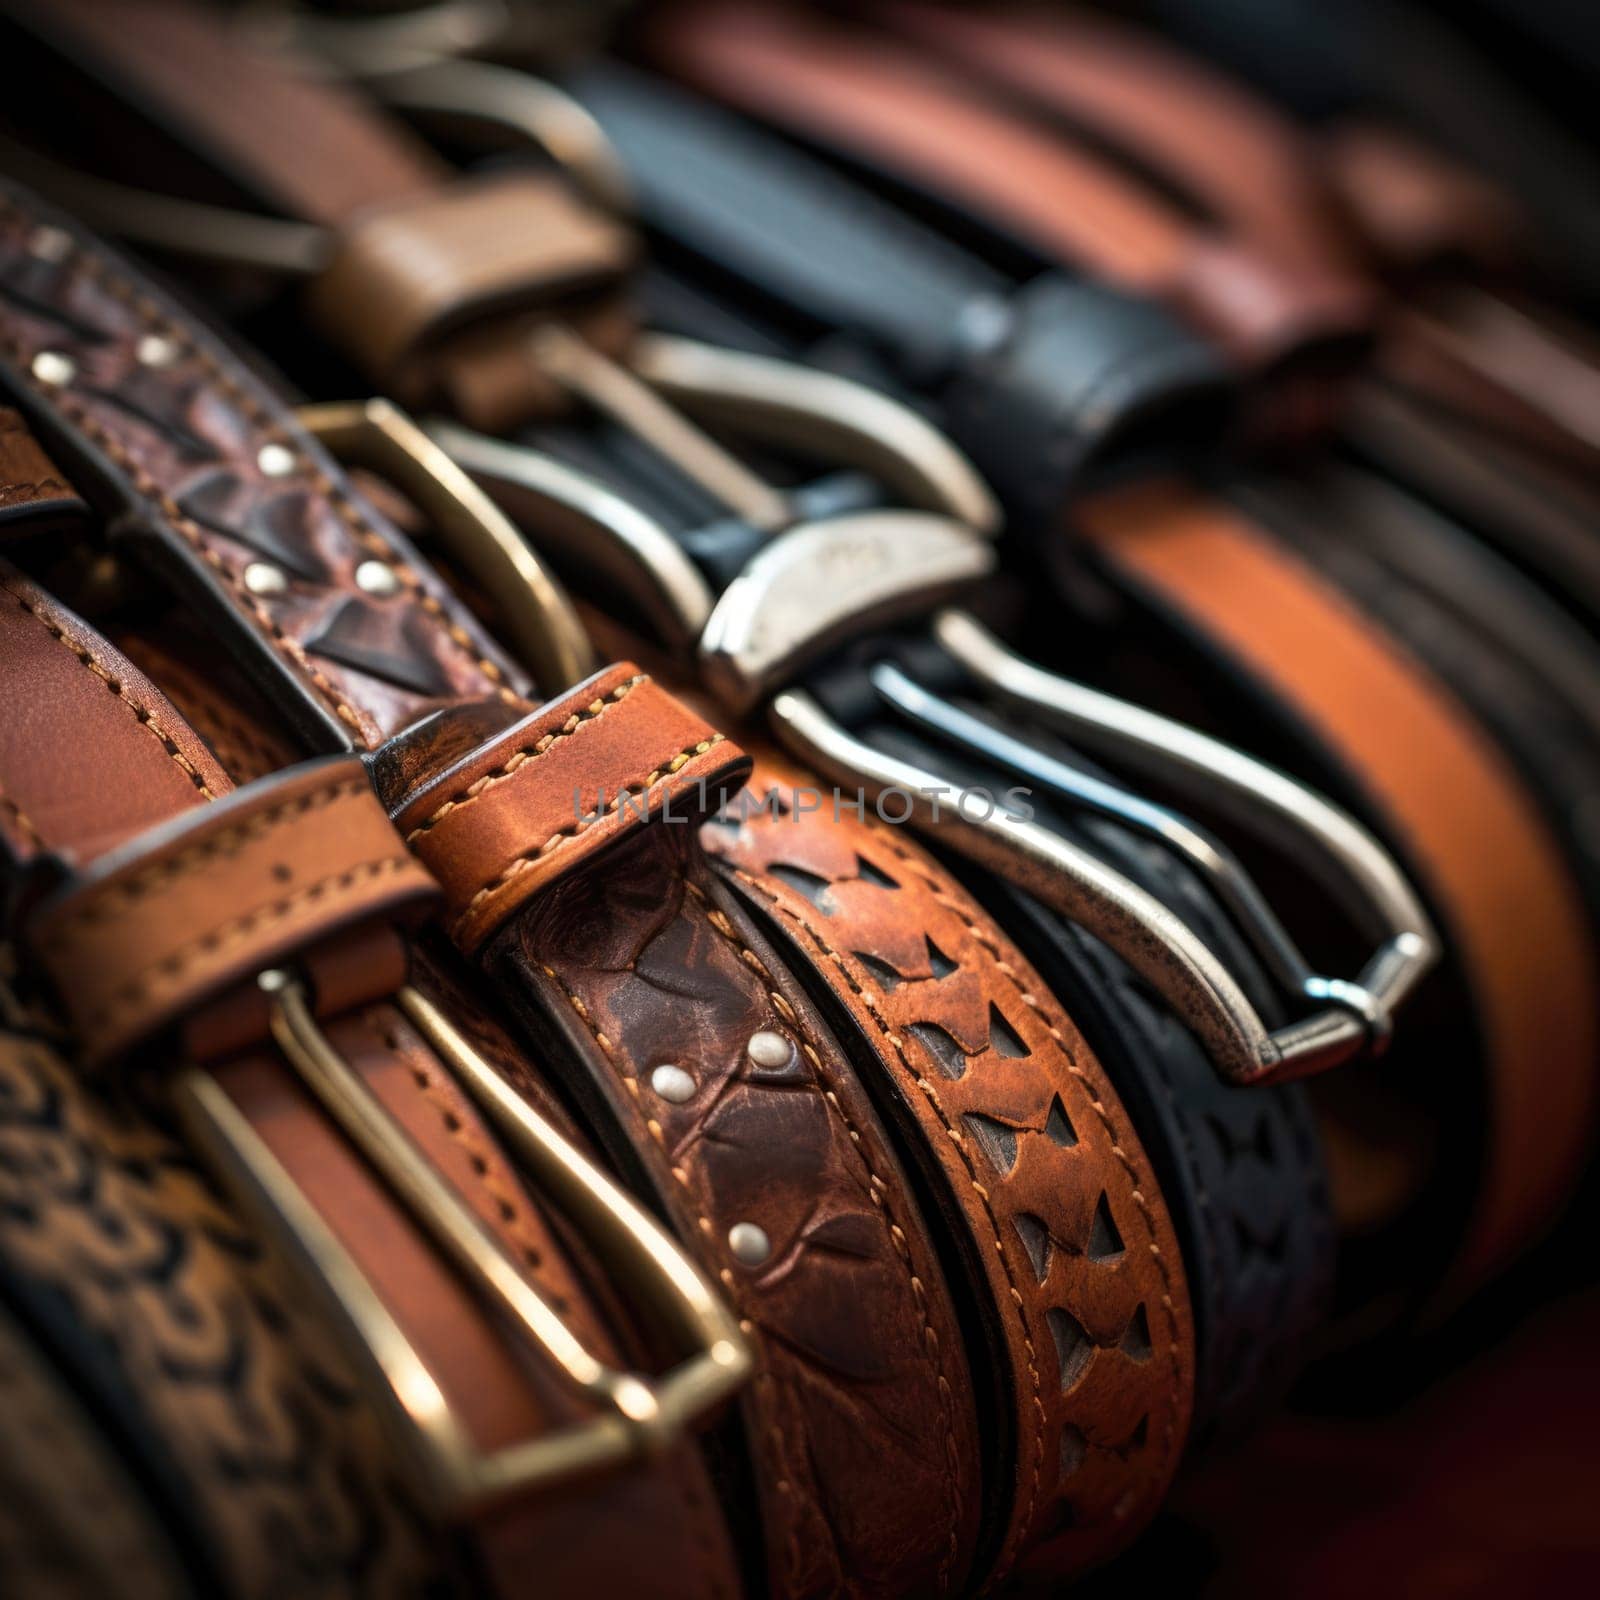 A row of leather belts with different colors, AI by starush